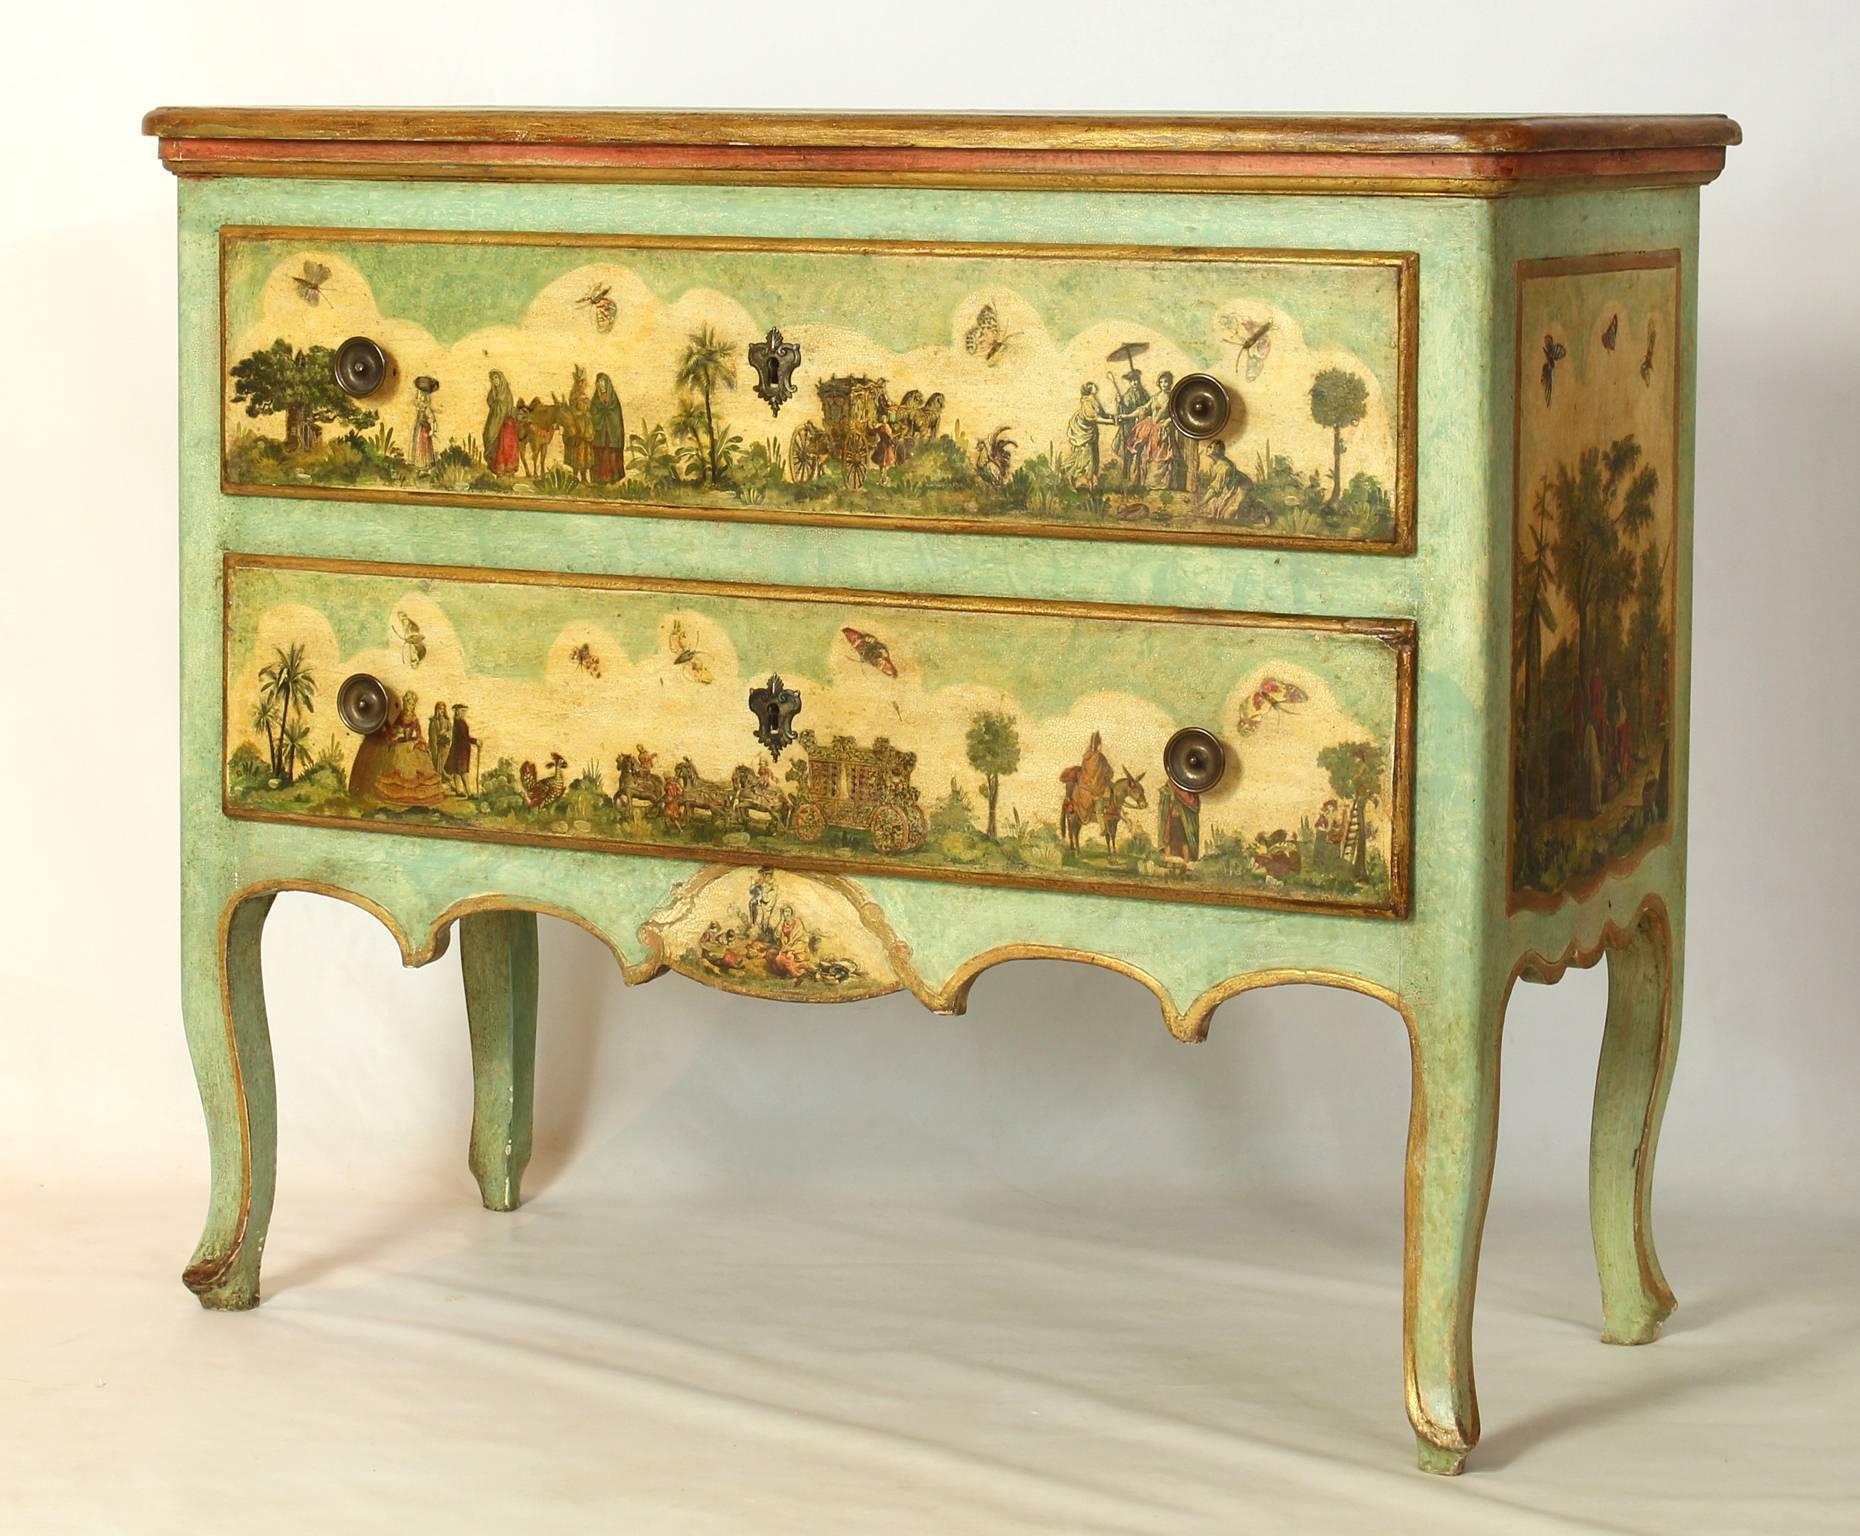 An early 20th century Italian two-drawer painted commode elaborately decorated with decopaged Venetian scenes throughout.